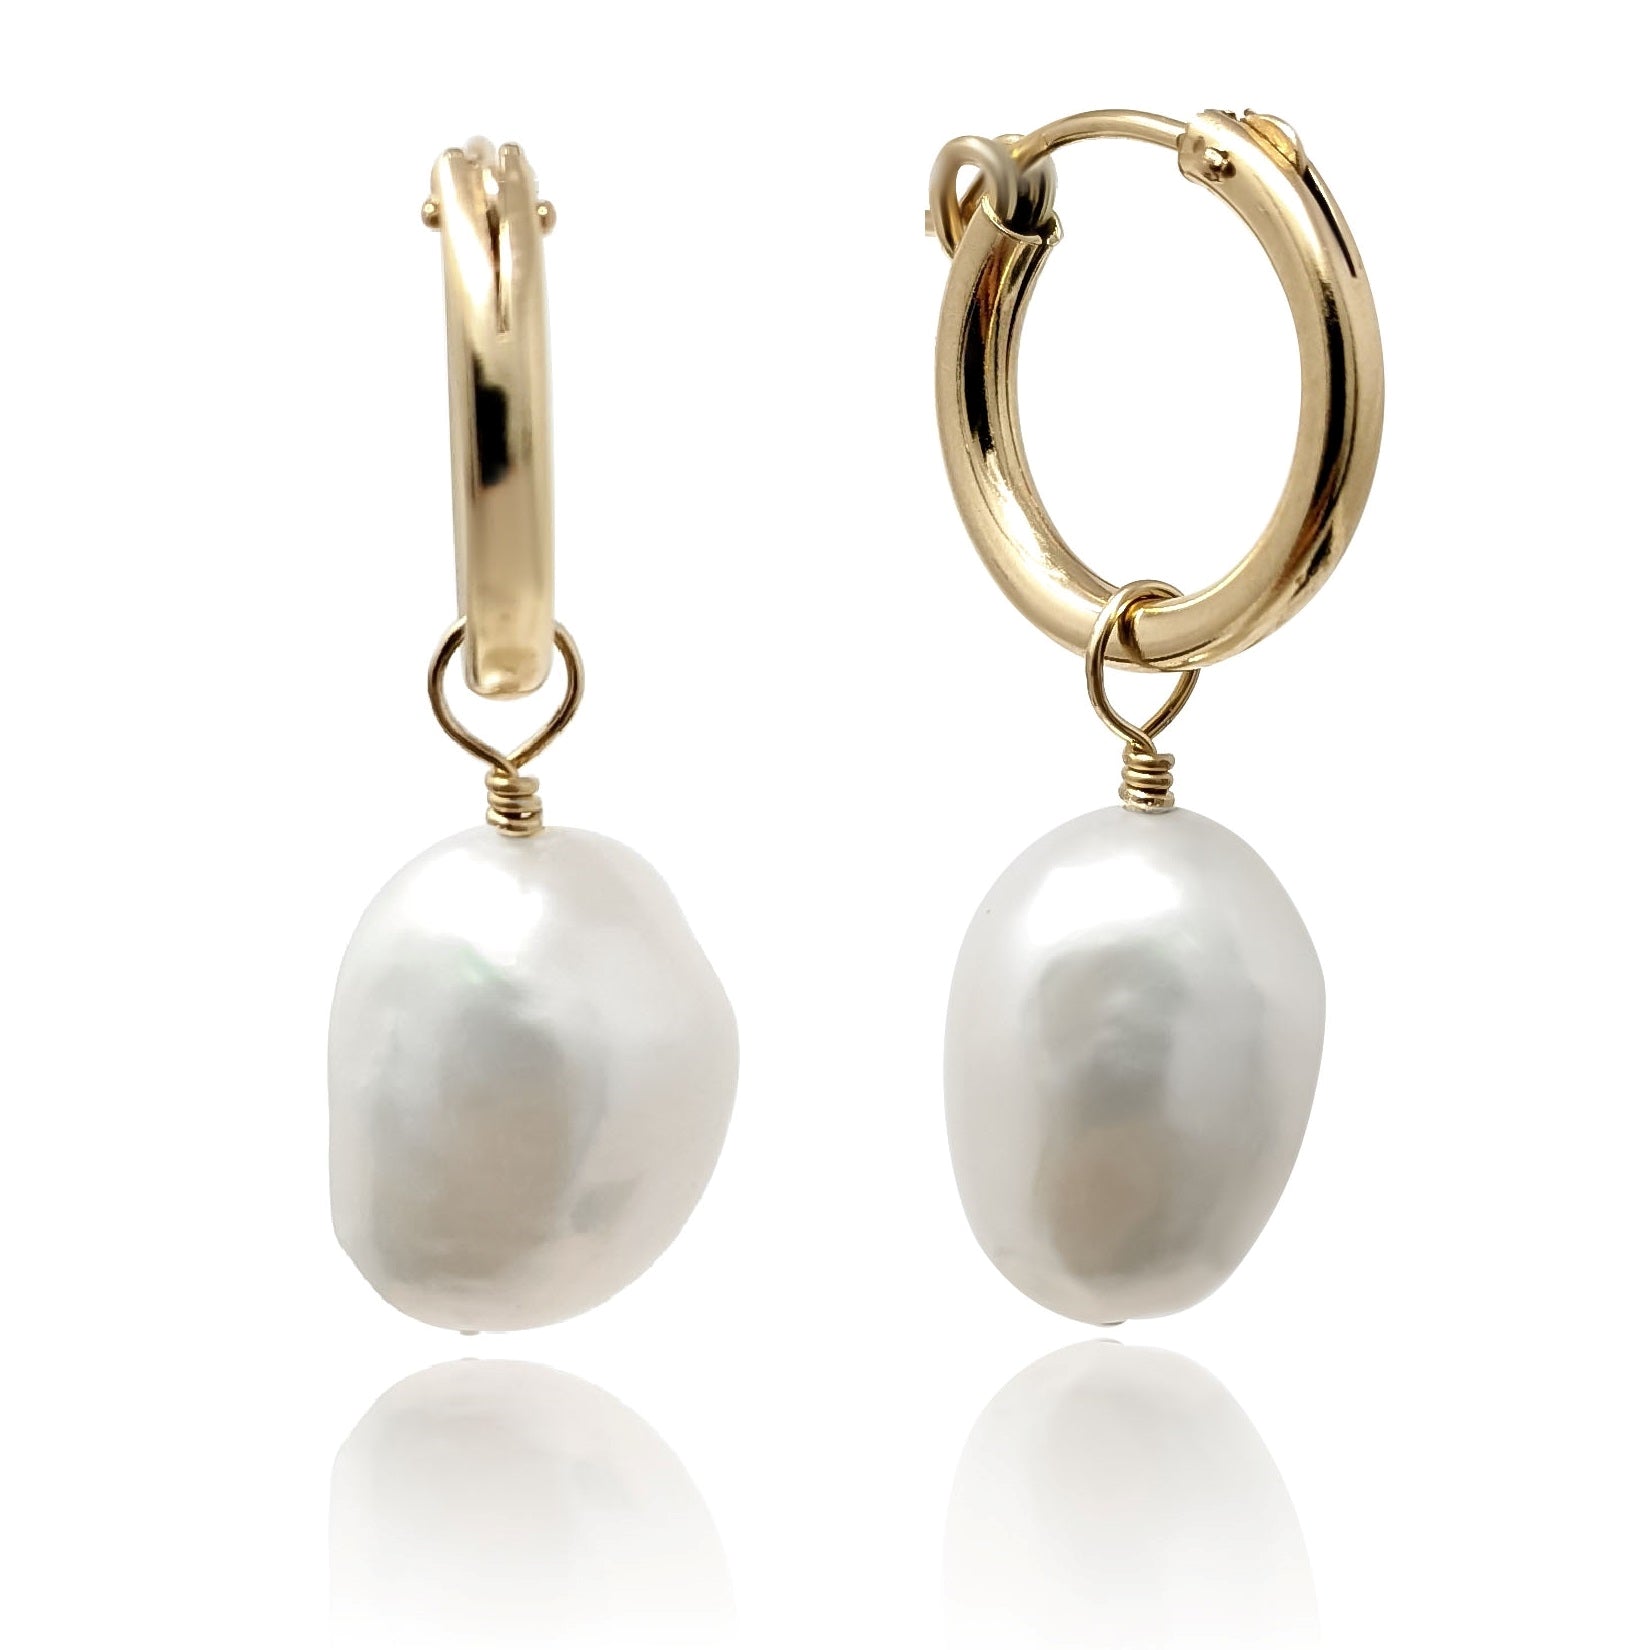 Gold filled hoop earring with baroque pearl pendant white background